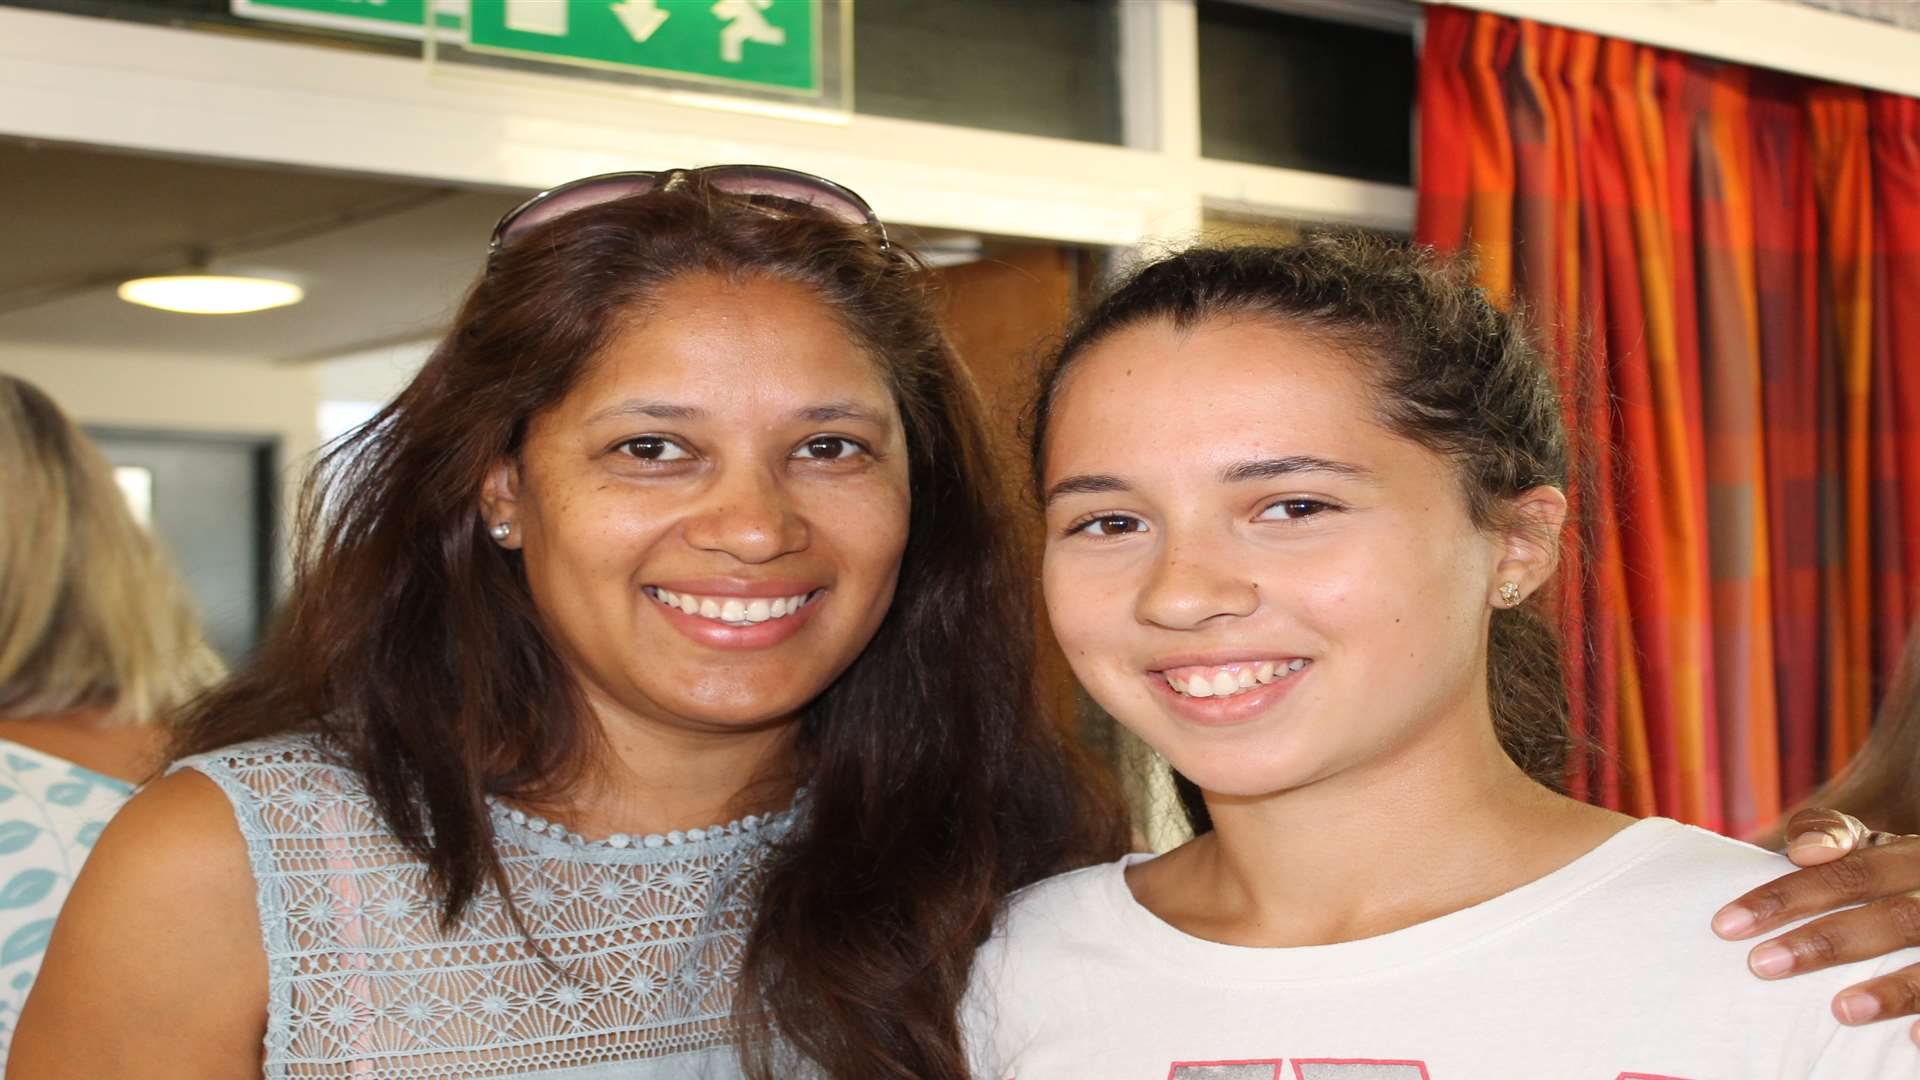 Celine Creswell (9A* & 2A) with her mother at Weald of Kent Grammar School